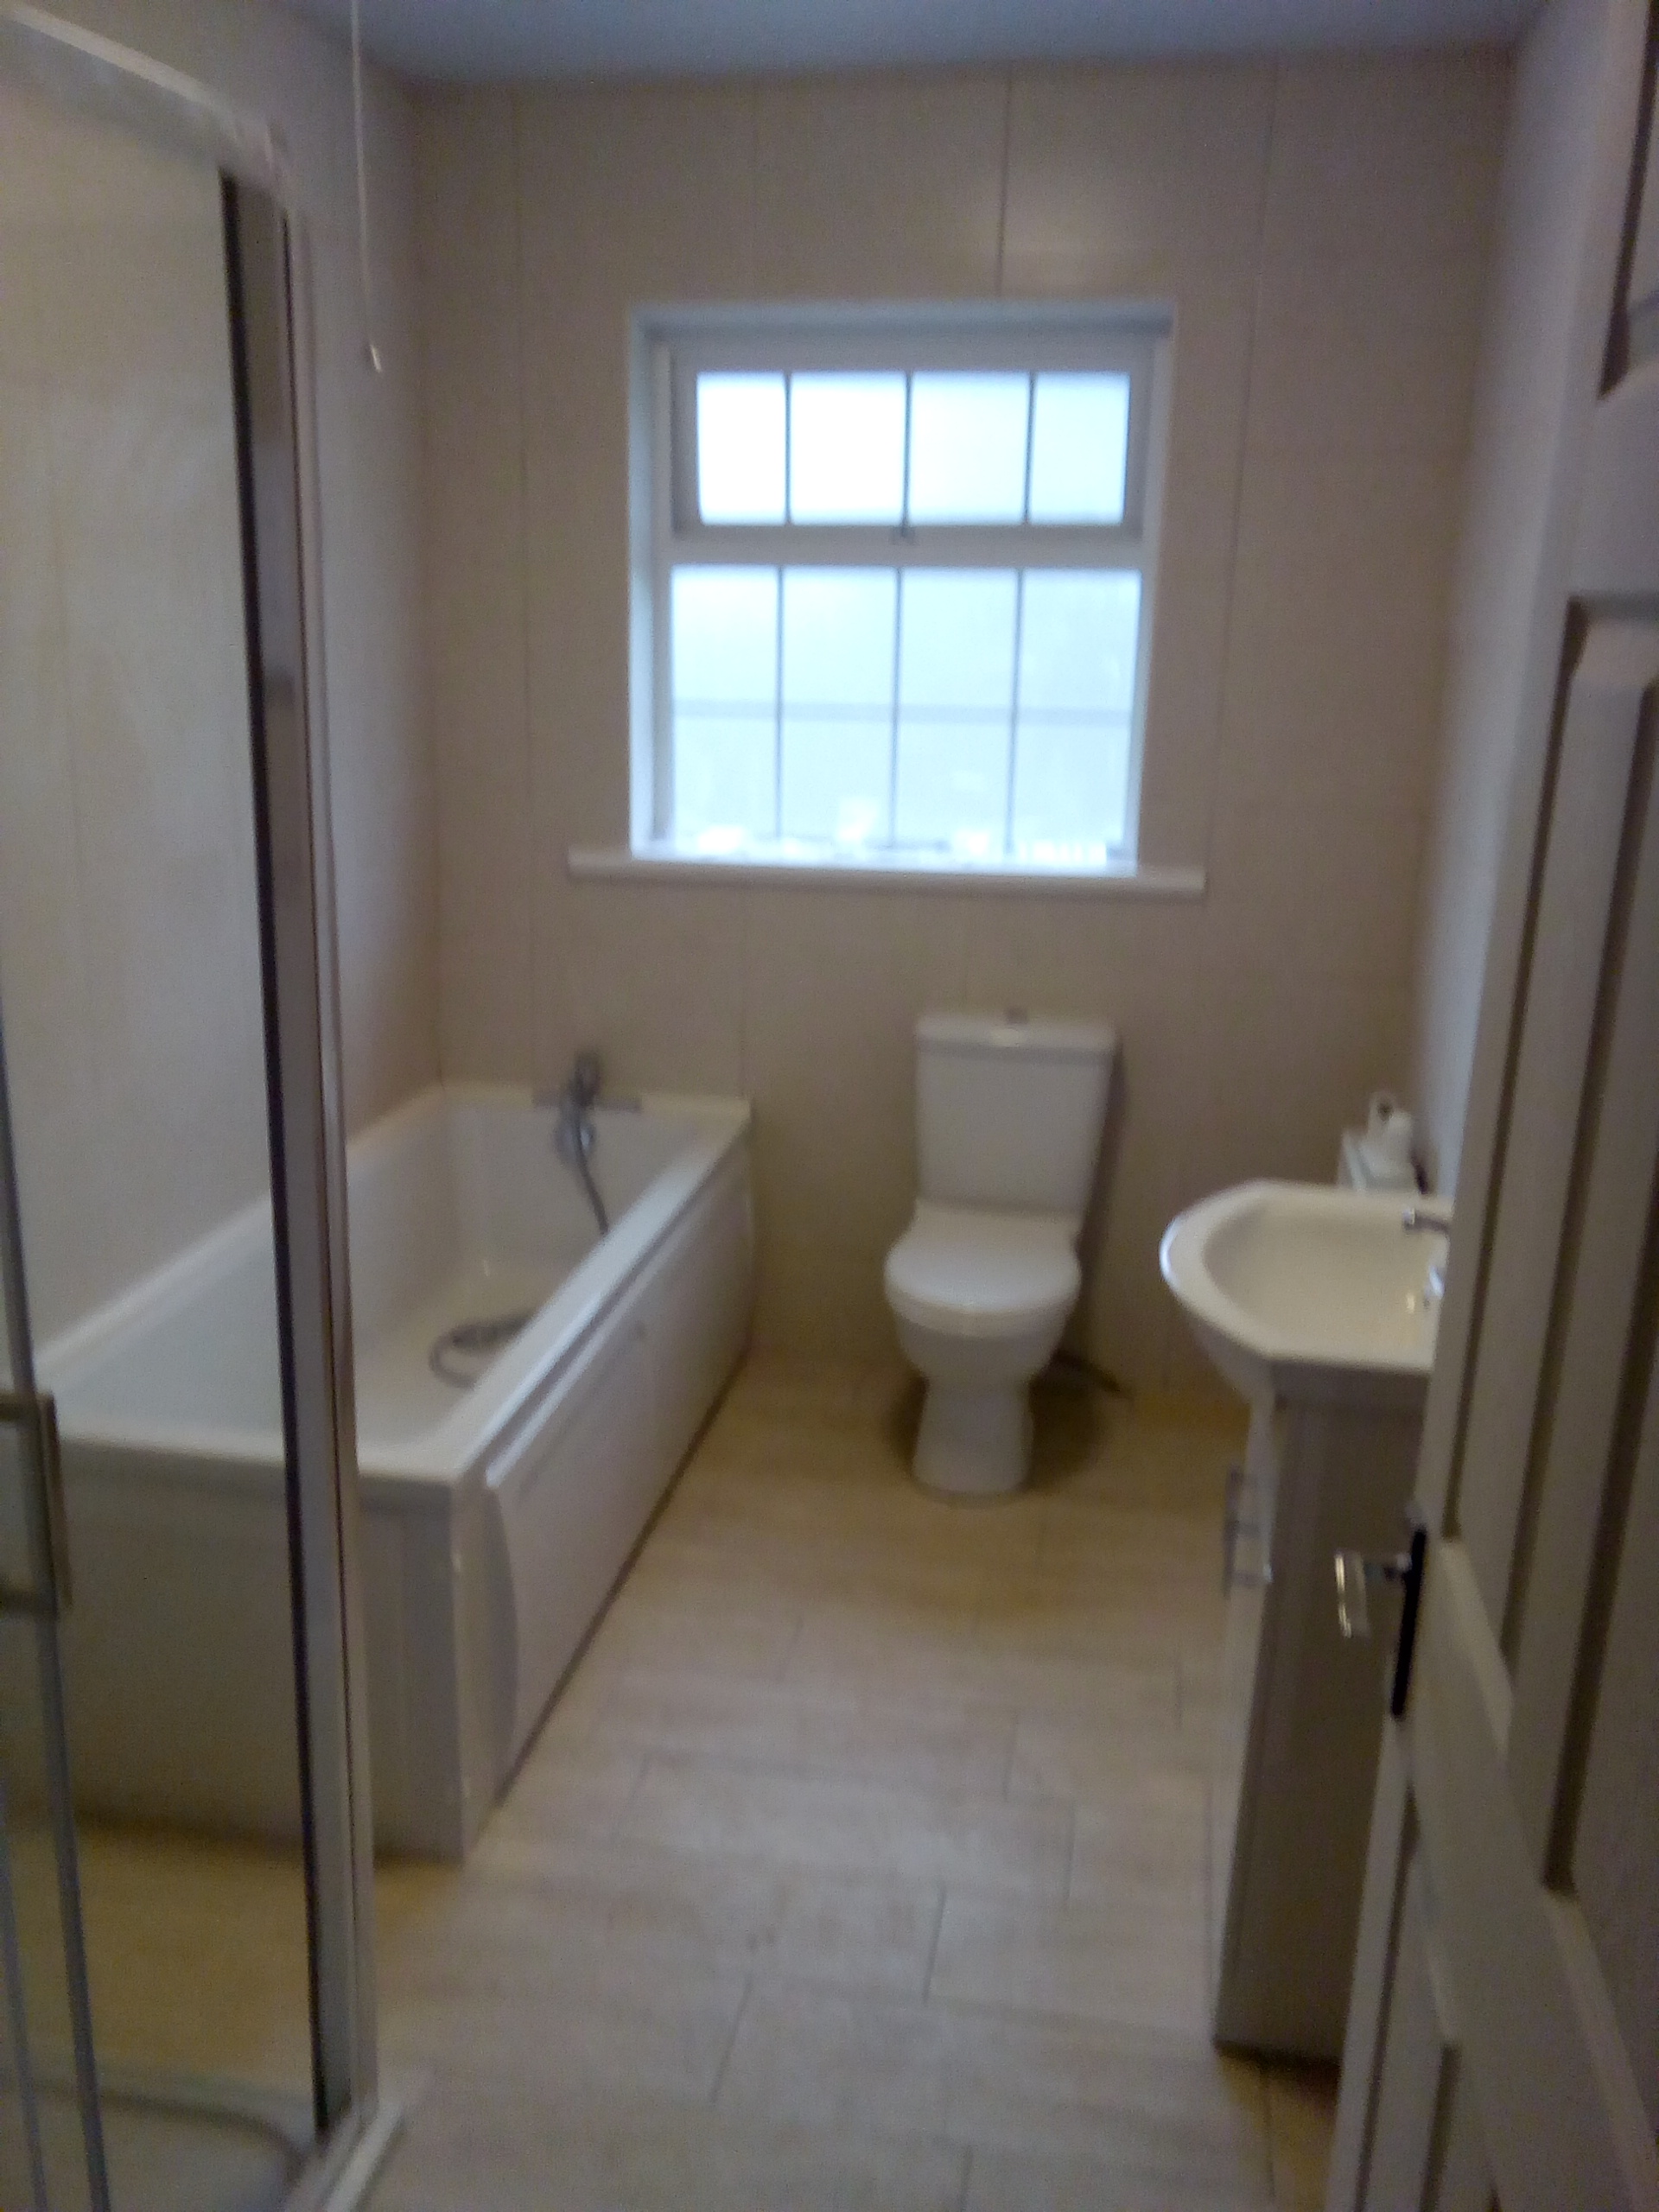 New bathroom in Oranmore, Galway